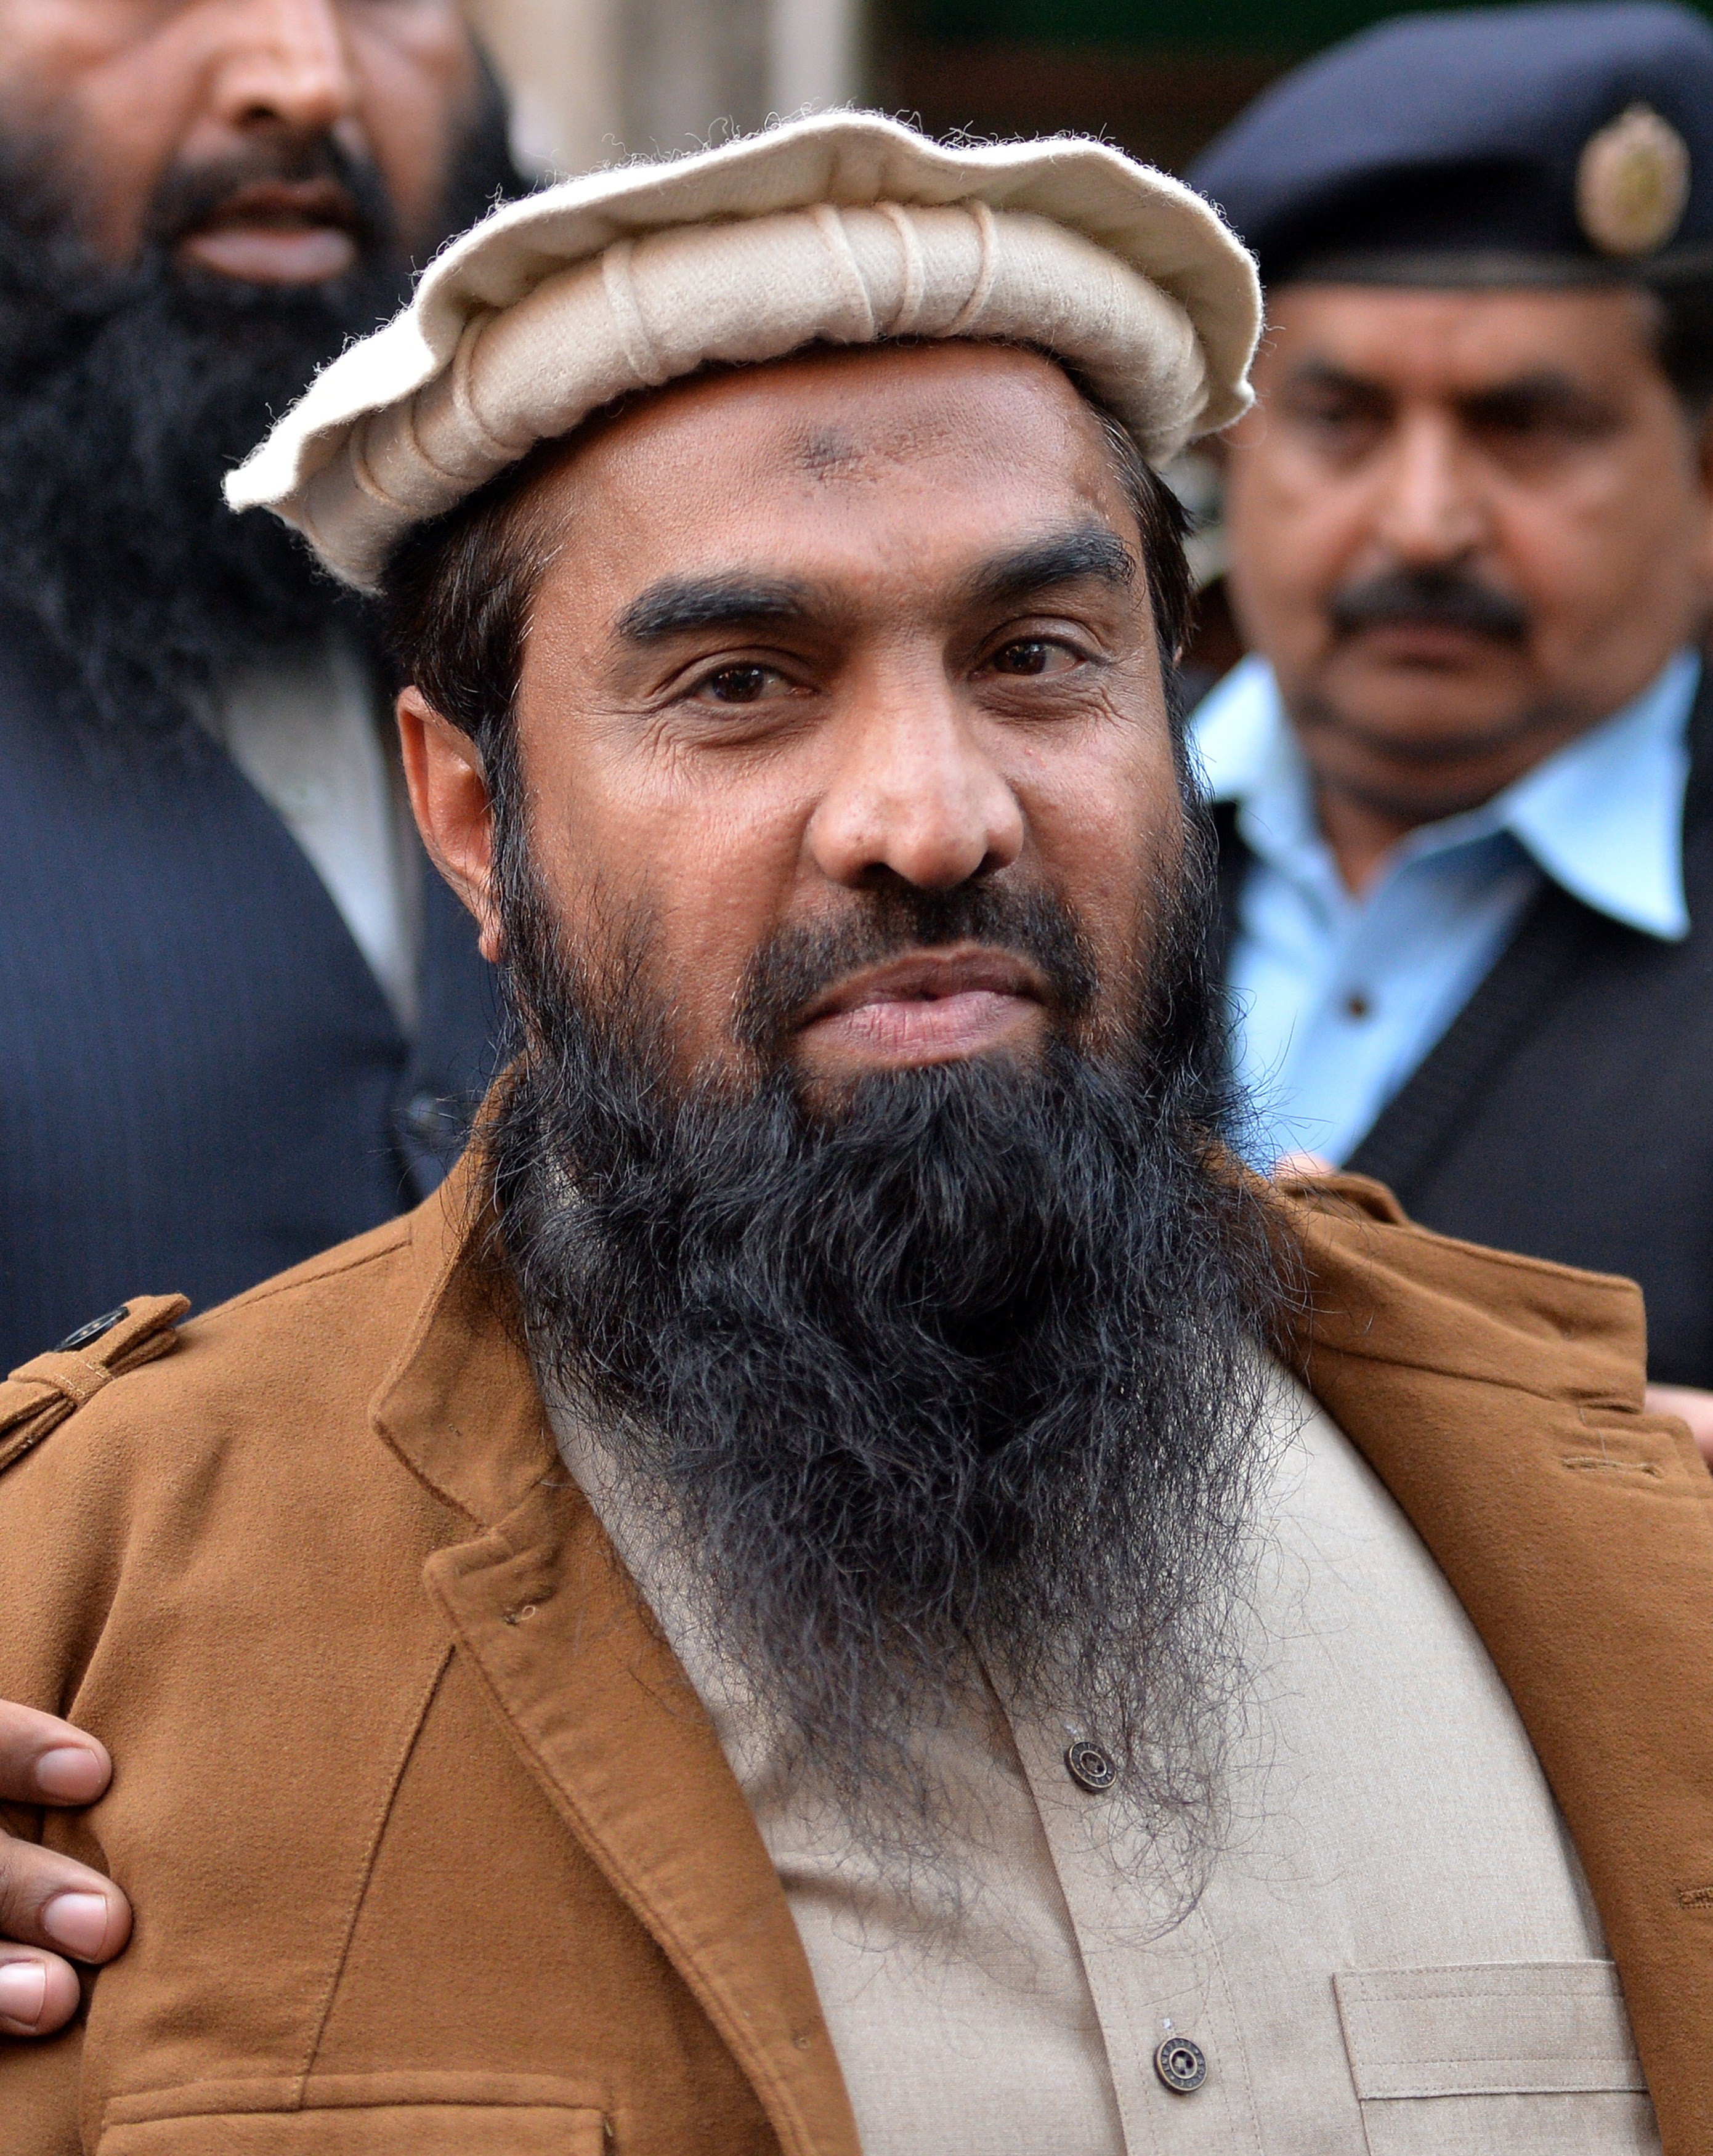 Pakistani security personnel escort Zaki-ur-Rehman Lakhvi, alleged mastermind of the 2008 Mumbai attacks, as he leaves the court after a hearing in Islamabad on Jan. 1, 2015 (Aamir Qureshi—AFP/Getty Images)